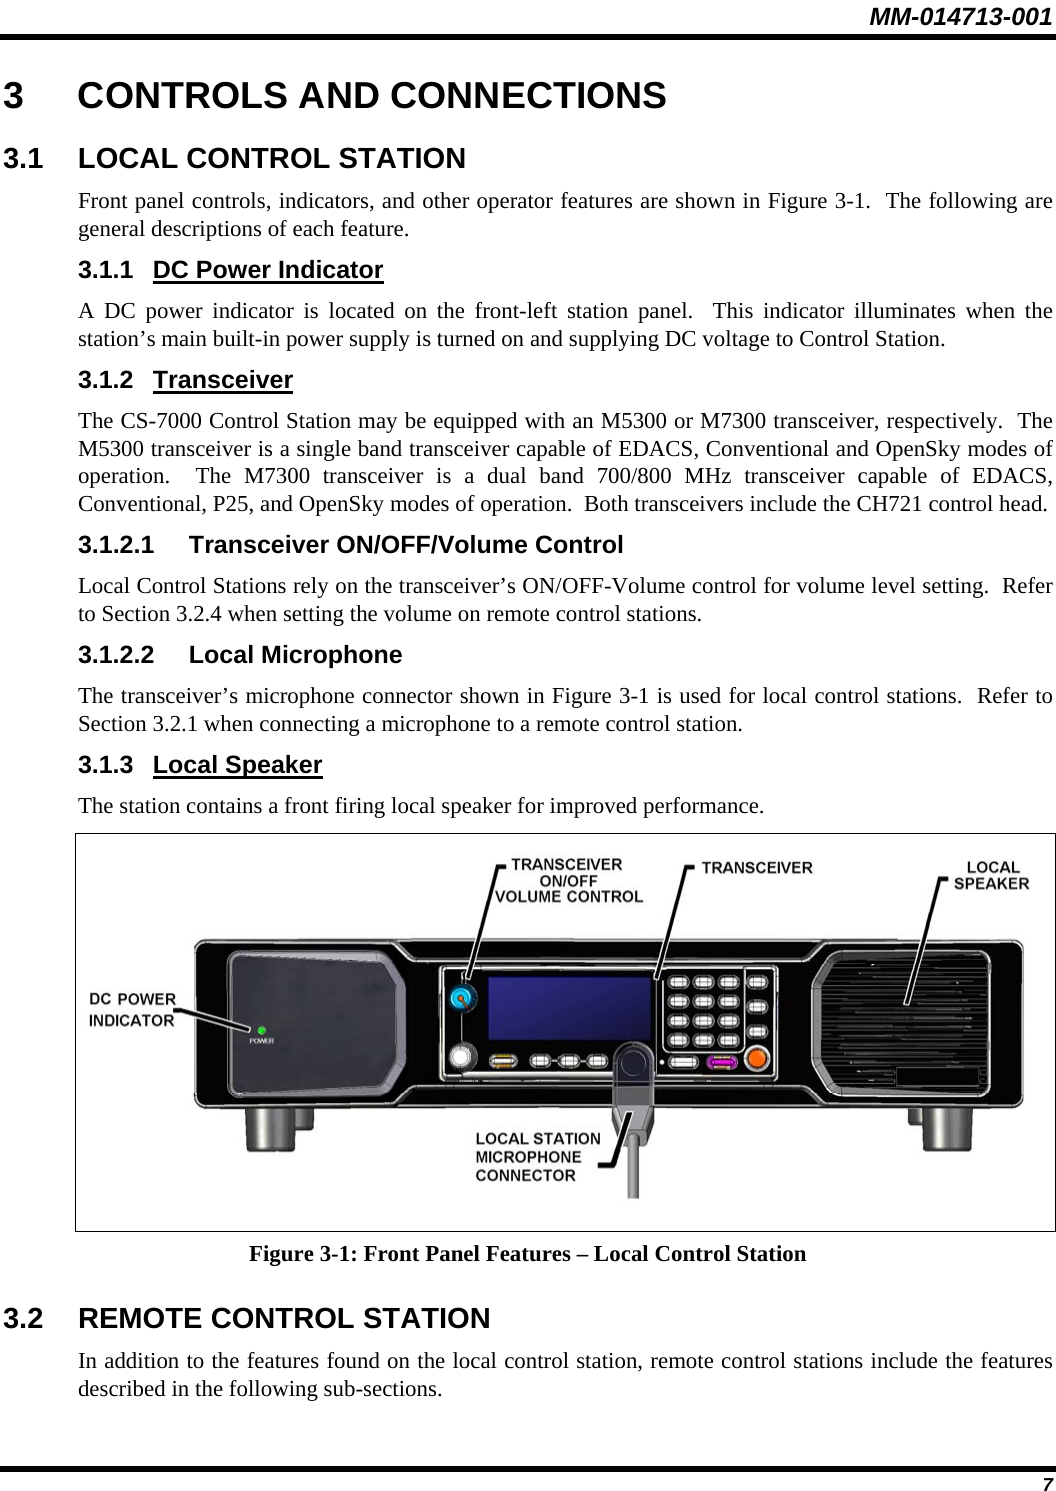 MM-014713-001  7 3 CONTROLS AND CONNECTIONS 3.1  LOCAL CONTROL STATION Front panel controls, indicators, and other operator features are shown in Figure 3-1.  The following are general descriptions of each feature. 3.1.1 DC Power Indicator A DC power indicator is located on the front-left station panel.  This indicator illuminates when the station’s main built-in power supply is turned on and supplying DC voltage to Control Station. 3.1.2 Transceiver The CS-7000 Control Station may be equipped with an M5300 or M7300 transceiver, respectively.  The M5300 transceiver is a single band transceiver capable of EDACS, Conventional and OpenSky modes of operation.  The M7300 transceiver is a dual band 700/800 MHz transceiver capable of EDACS, Conventional, P25, and OpenSky modes of operation.  Both transceivers include the CH721 control head. 3.1.2.1  Transceiver ON/OFF/Volume Control Local Control Stations rely on the transceiver’s ON/OFF-Volume control for volume level setting.  Refer to Section 3.2.4 when setting the volume on remote control stations. 3.1.2.2 Local Microphone The transceiver’s microphone connector shown in Figure 3-1 is used for local control stations.  Refer to Section 3.2.1 when connecting a microphone to a remote control station. 3.1.3 Local Speaker The station contains a front firing local speaker for improved performance.  Figure 3-1: Front Panel Features – Local Control Station 3.2 REMOTE CONTROL STATION In addition to the features found on the local control station, remote control stations include the features described in the following sub-sections. 